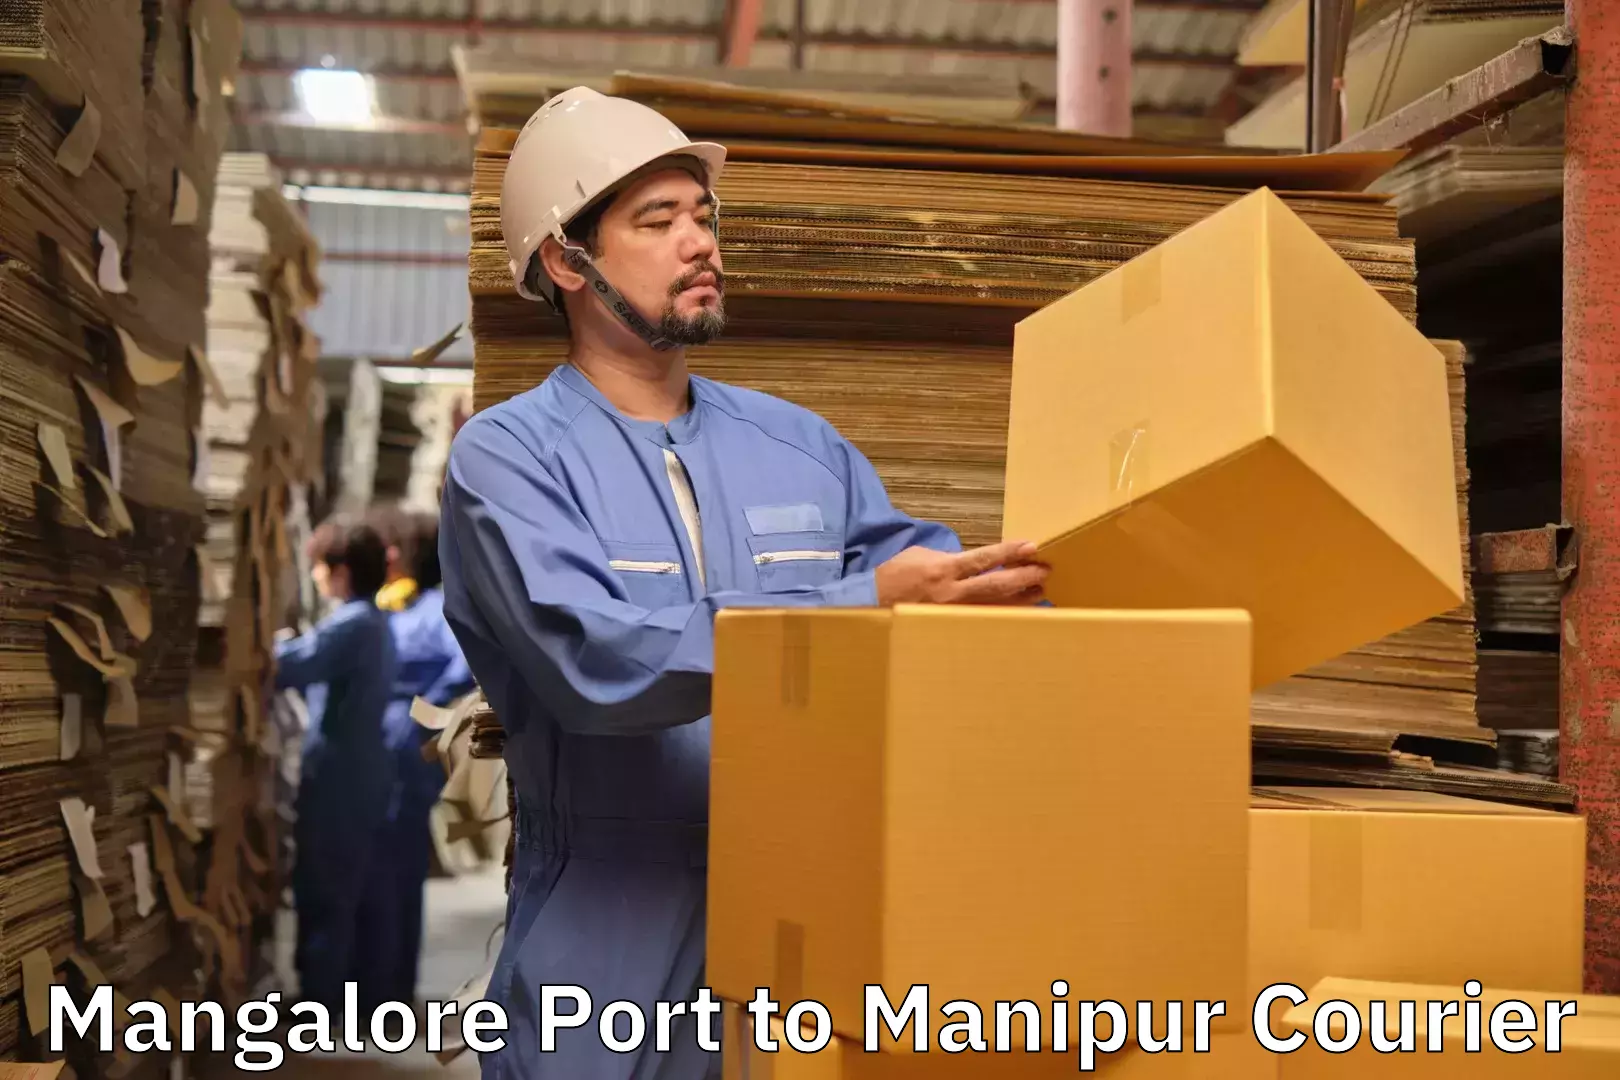 Luggage delivery network Mangalore Port to Ukhrul